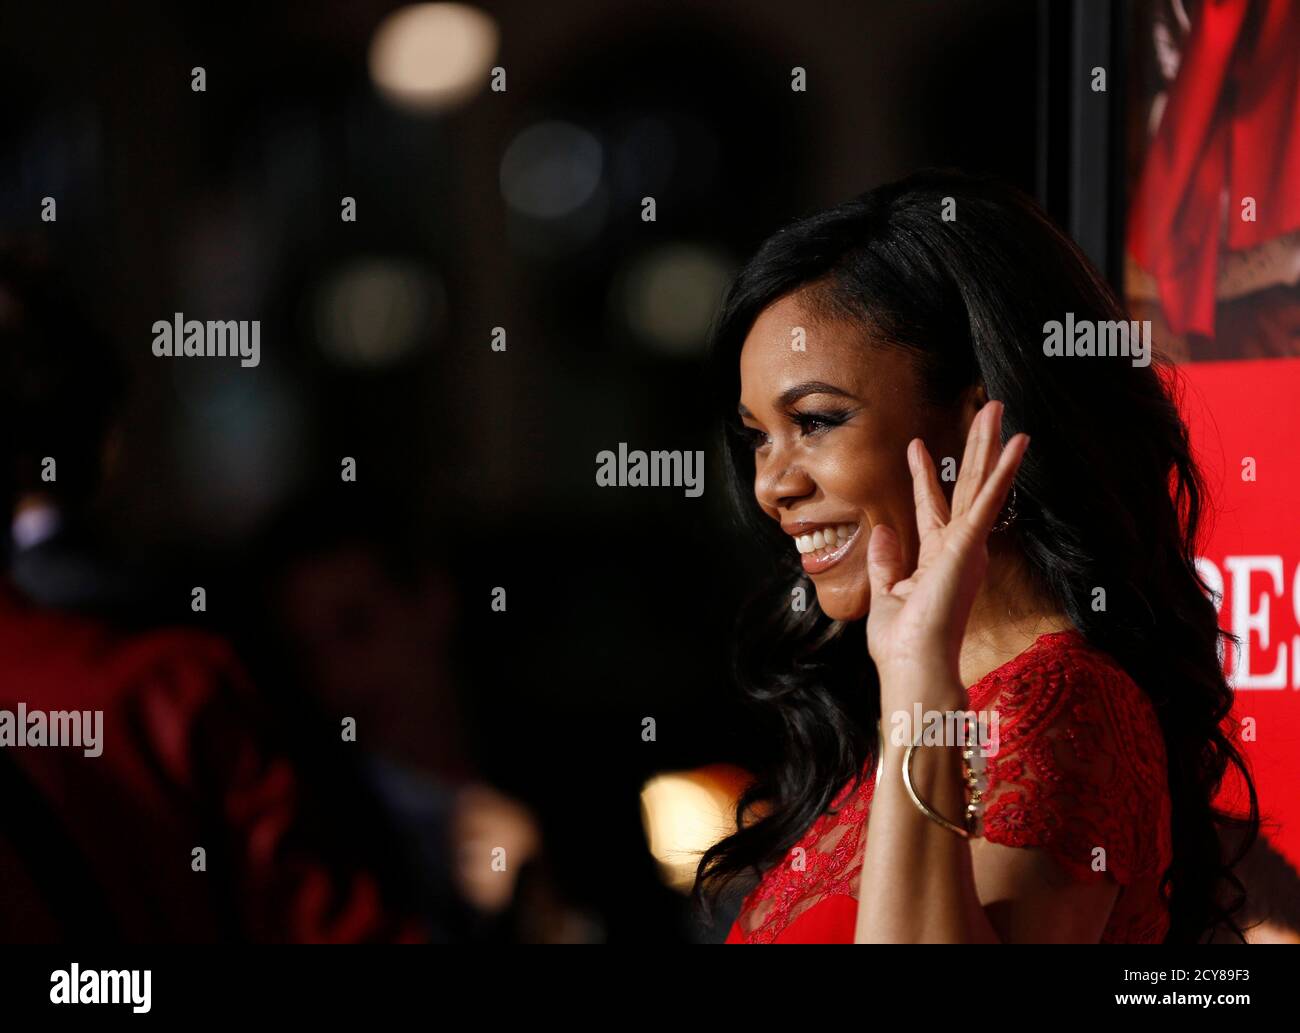 Cast Member Regina Hall Waves At The Premiere Of The Best Man Holiday In Hollywood California November 5 2013 The Movie Opens In The U S On November 15 Reuters Mario Anzuoni United States